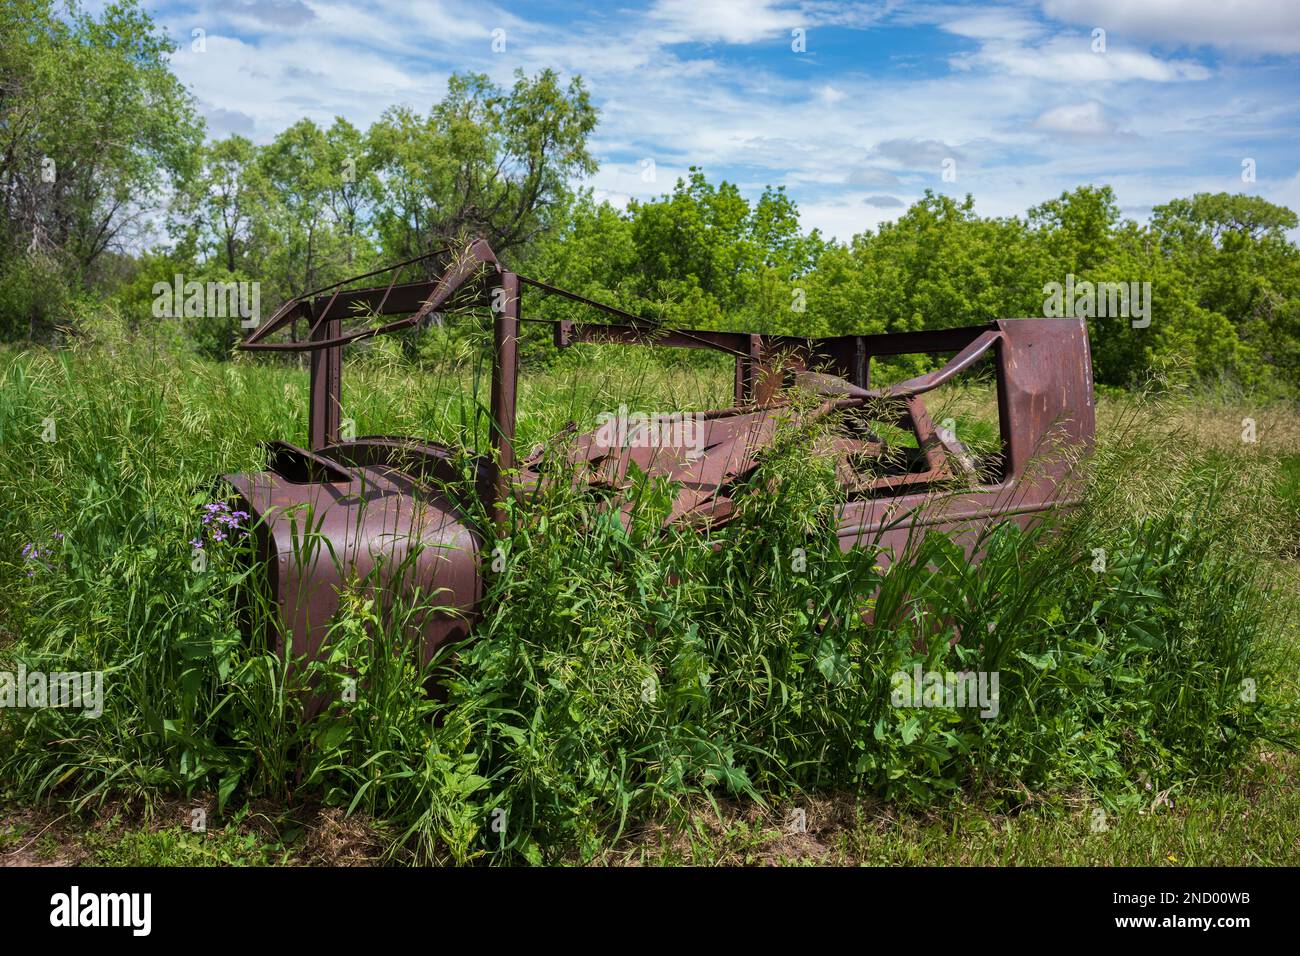 The rusty, metal frame of an antique car sits in a field of overgrown grass on a summer day with cumulus clouds in the sky. Stock Photo